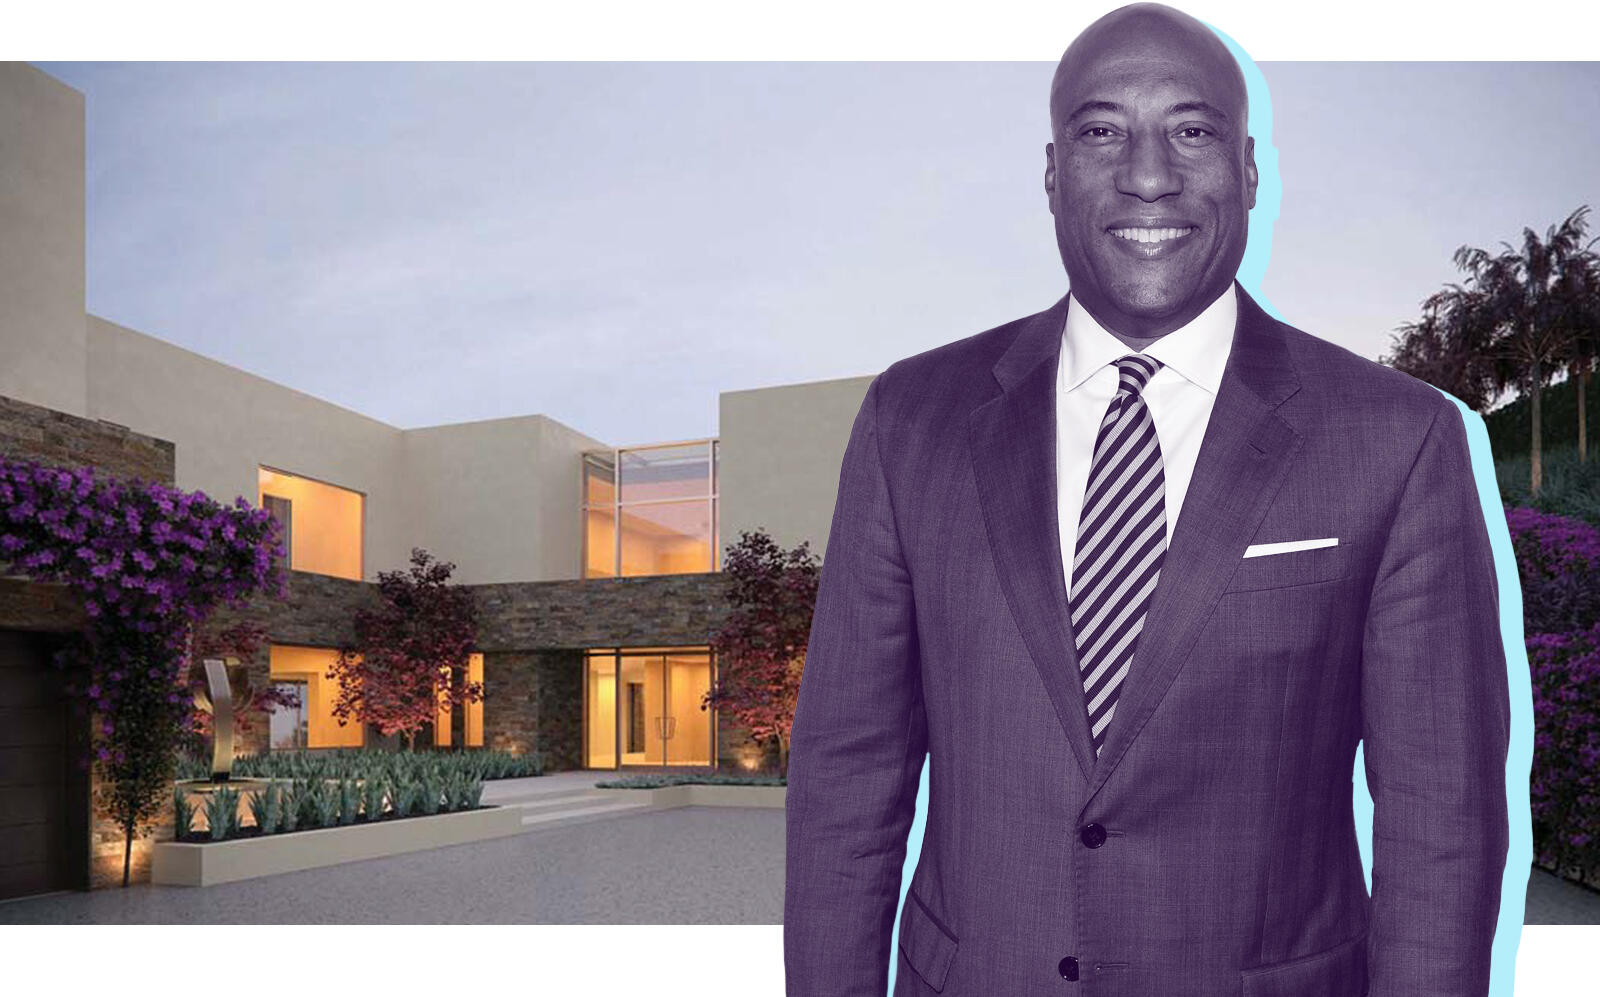 Rendering's of Byron Allen's future mansion. (Getty, Landry Design Group)